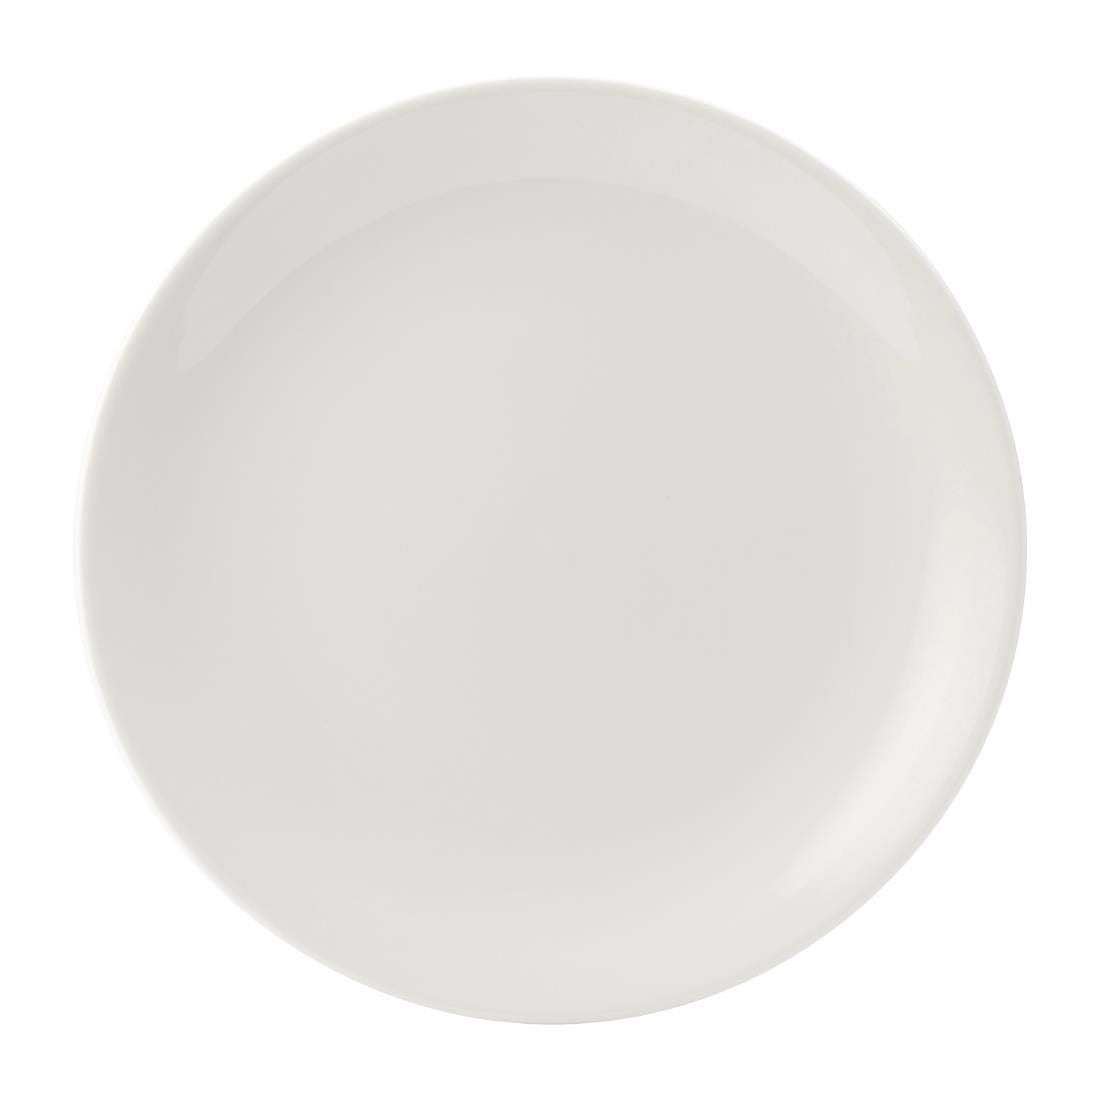 DY351 Utopia Titan Coupe Plates White 240mm (Pack of 24)